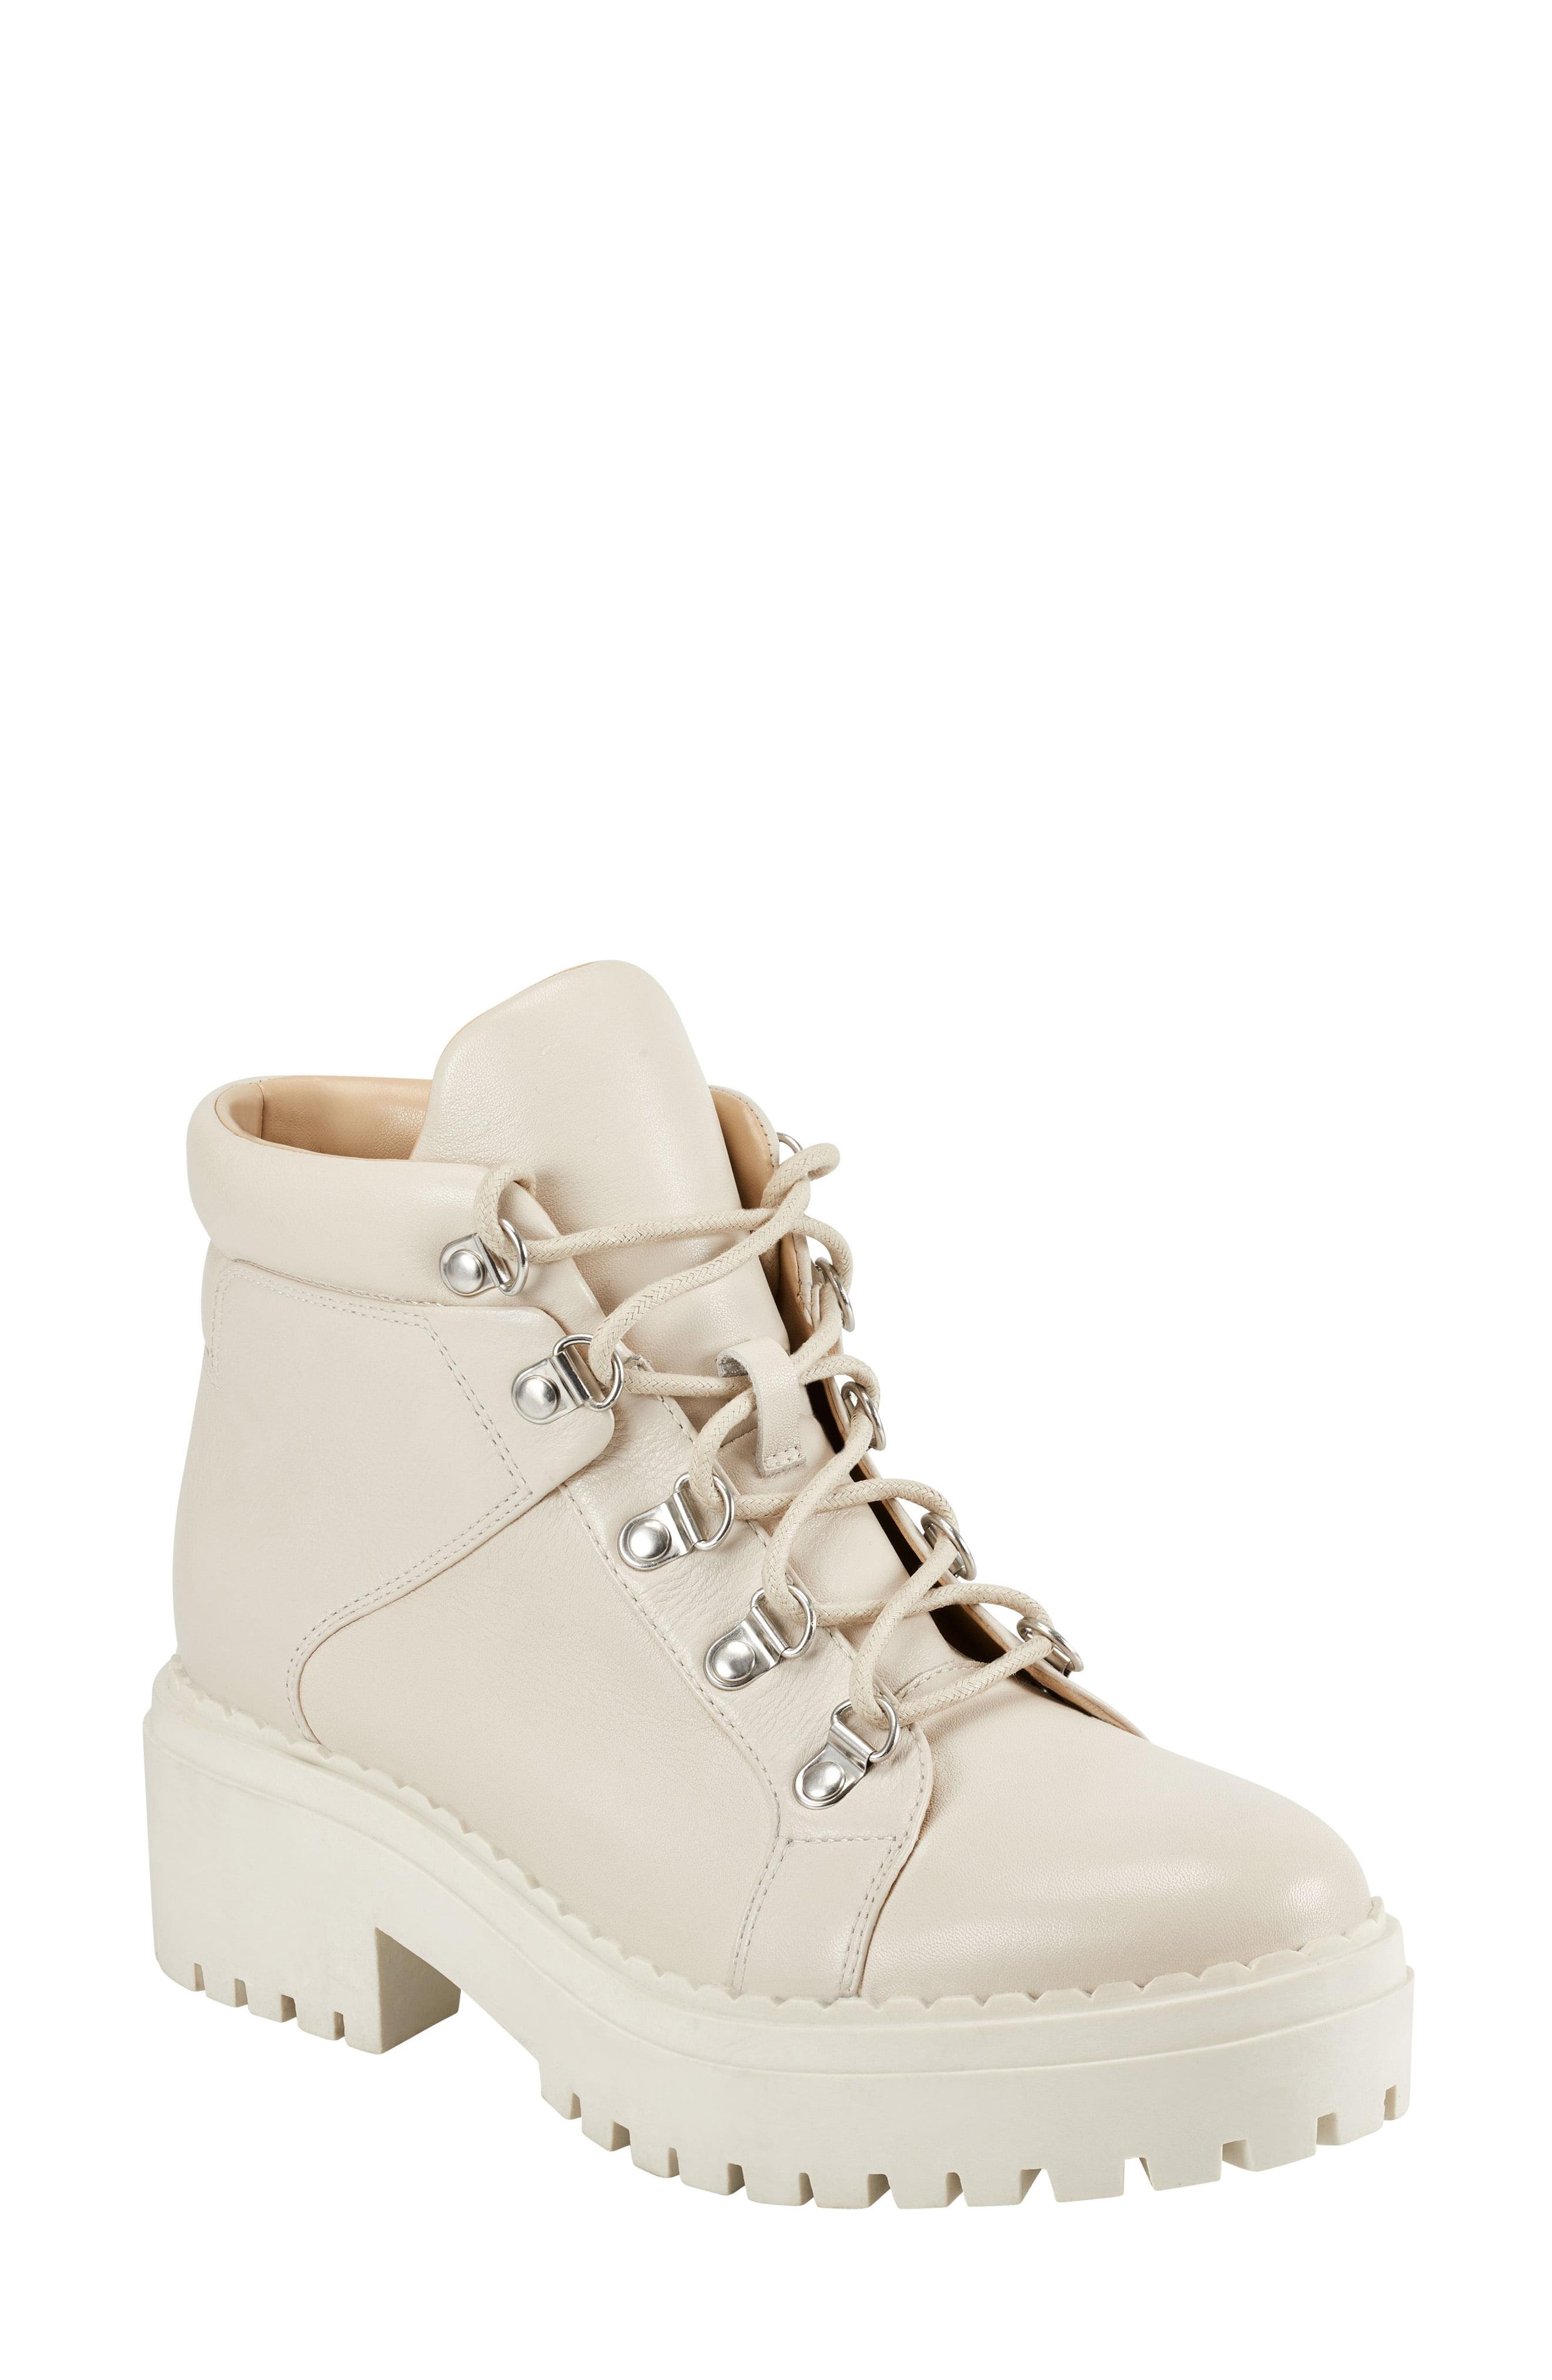 Marc Fisher Leather Nula Hiking Boot in White Leather (White) - Lyst